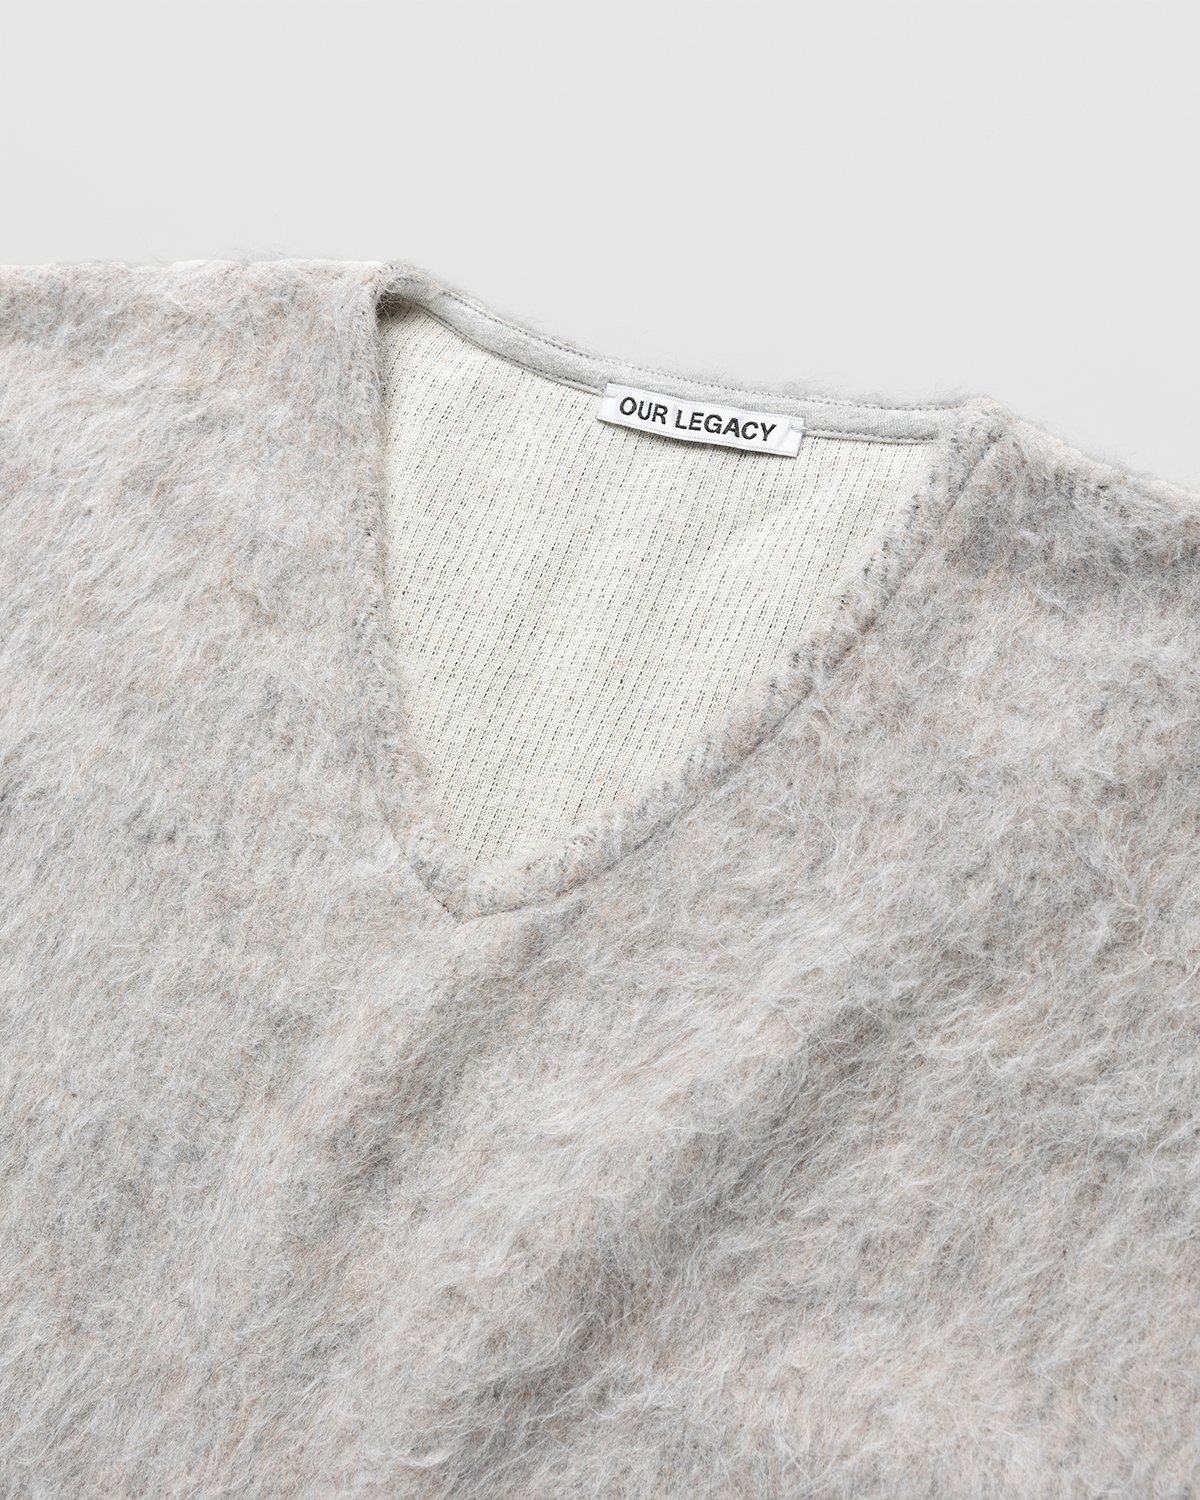 Our Legacy - Double Lock Sweater Grey Alpaca - Clothing - Grey - Image 3